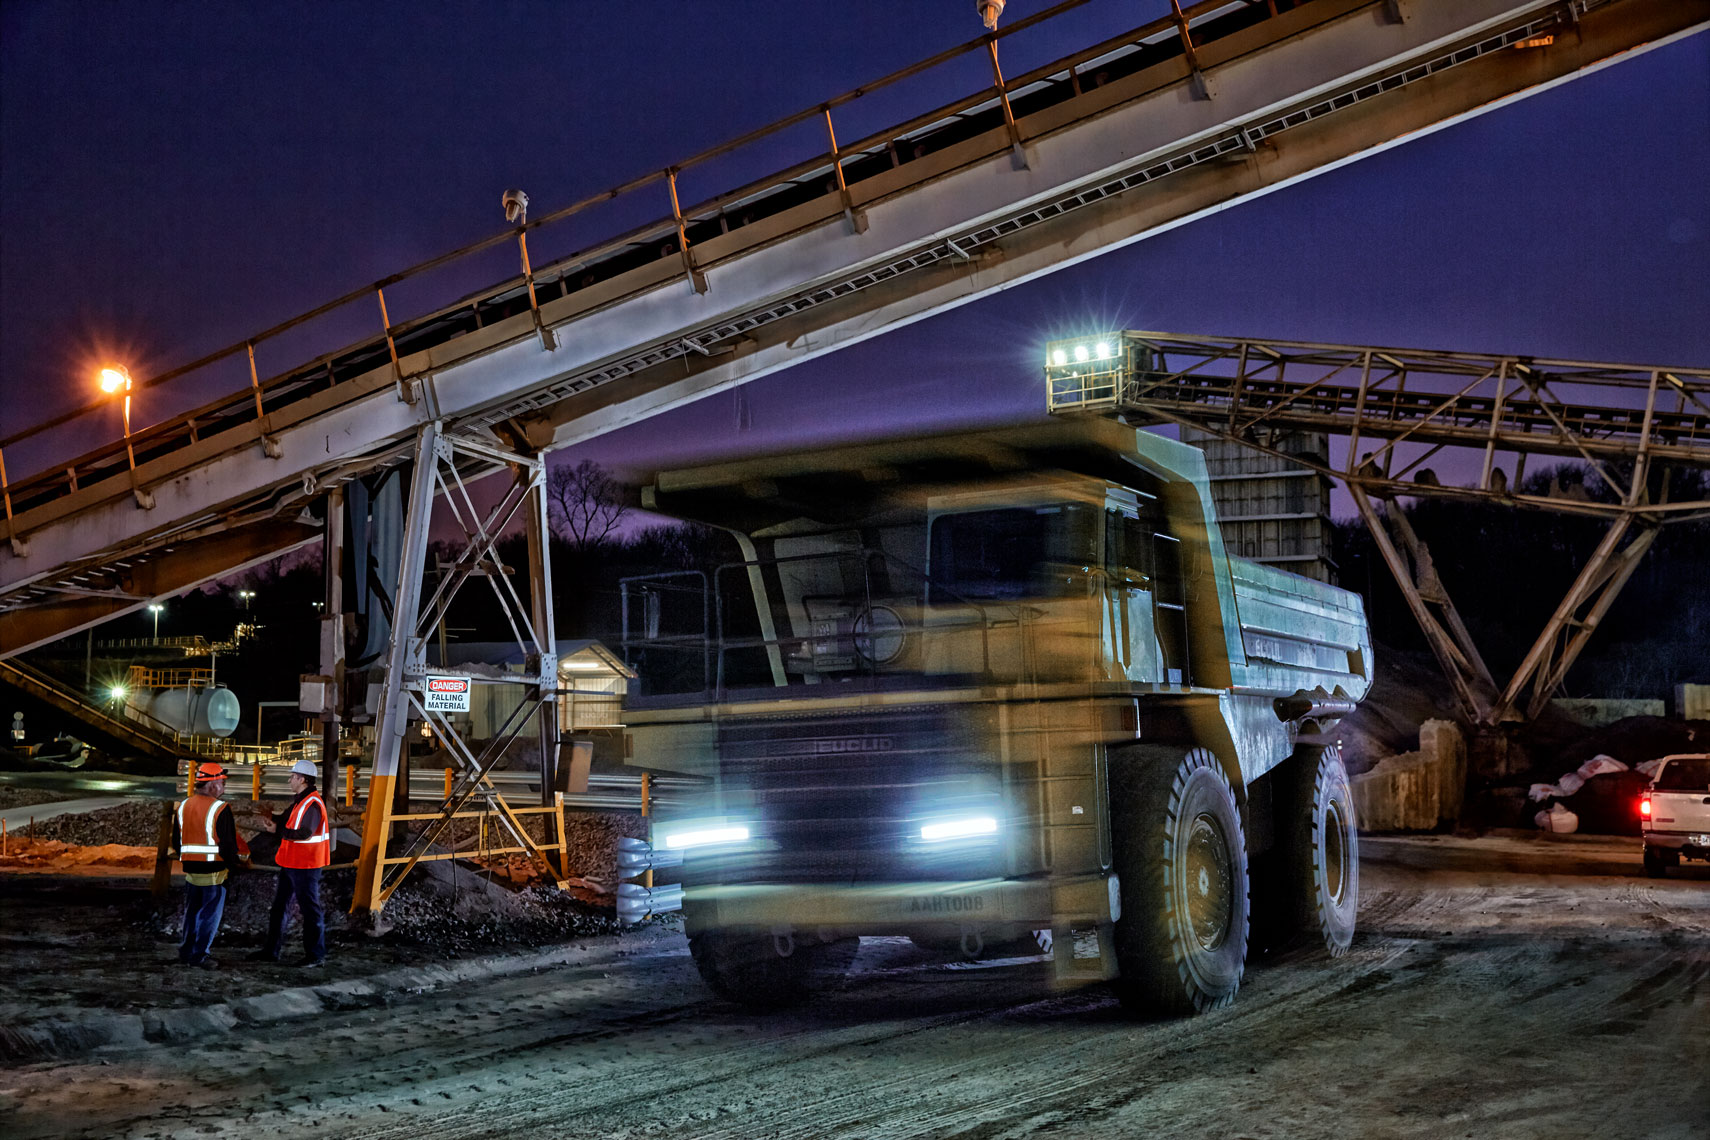 3M Quarry/ truck hauling/conveyors/Night scene/workers talking/Industrial photography/InsideOut Studios